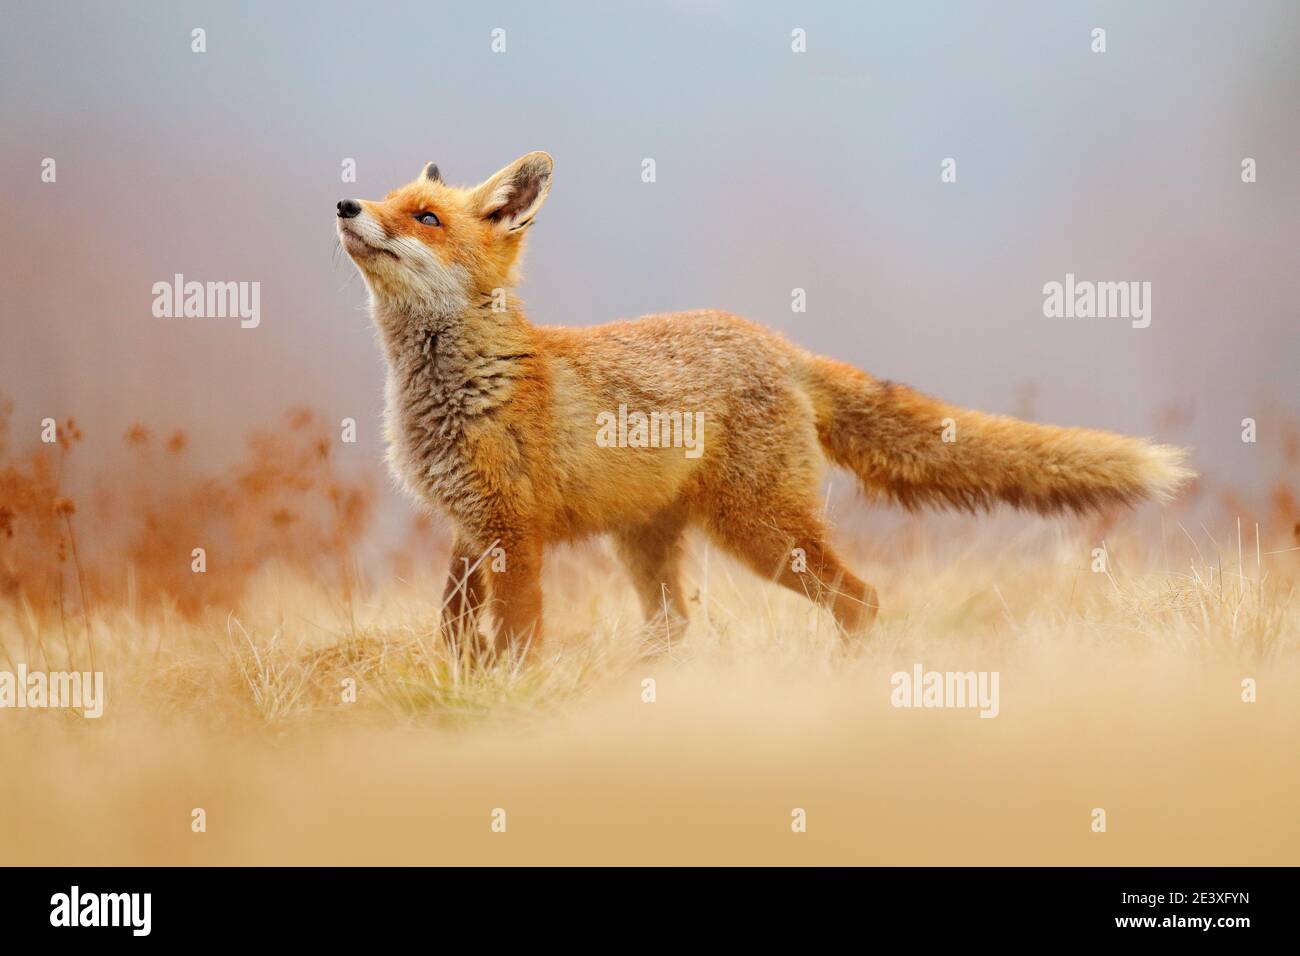 Red Fox hunting, Vulpes vulpes, wildlife scene from Europe. Orange fur coat animal in the nature habitat. Fox on the green forest meadow. Stock Photo